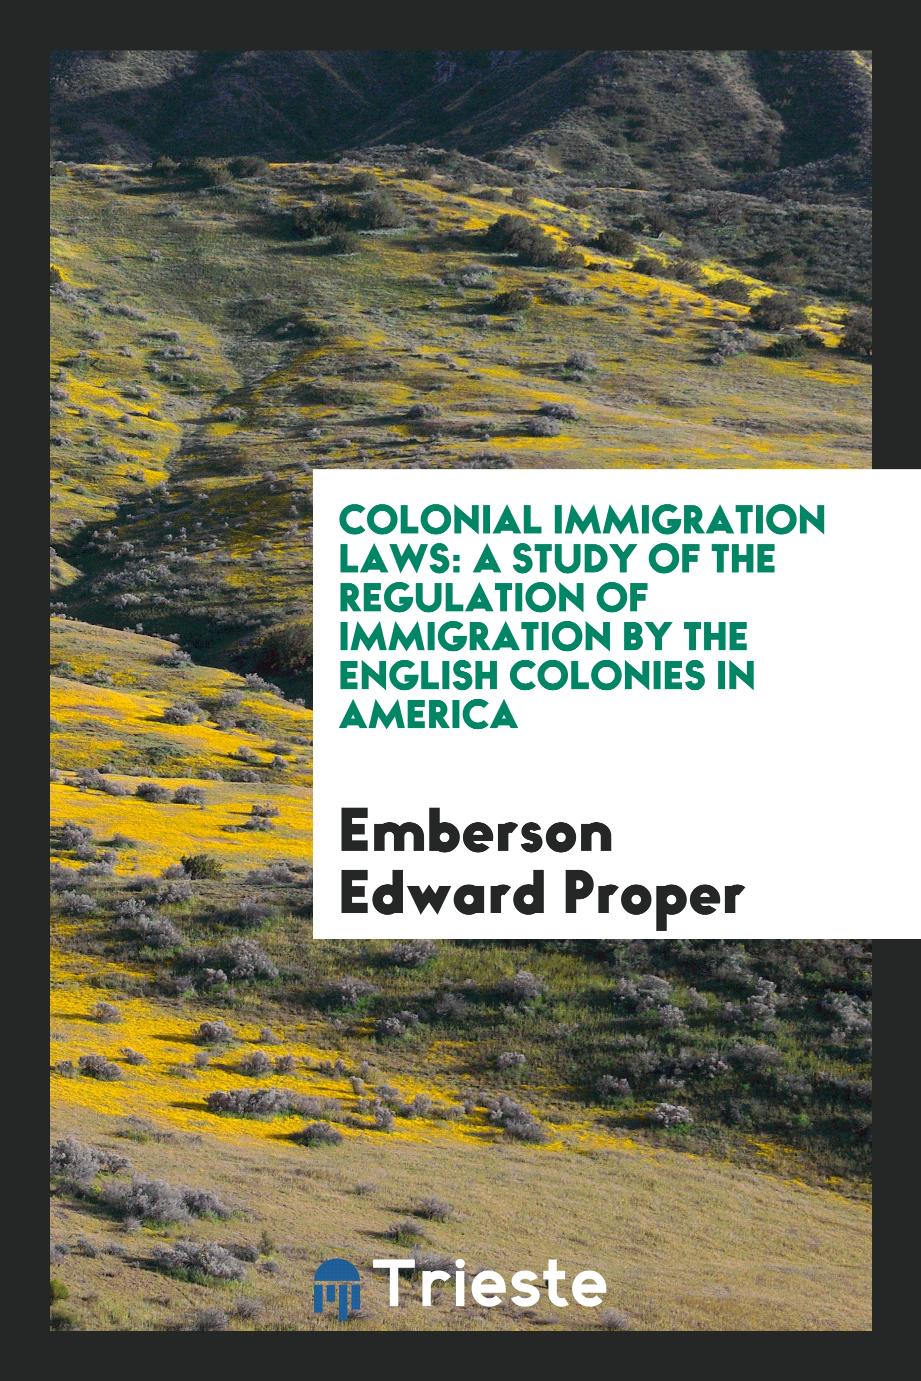 Colonial Immigration Laws: A Study of the Regulation of Immigration by the English Colonies in America